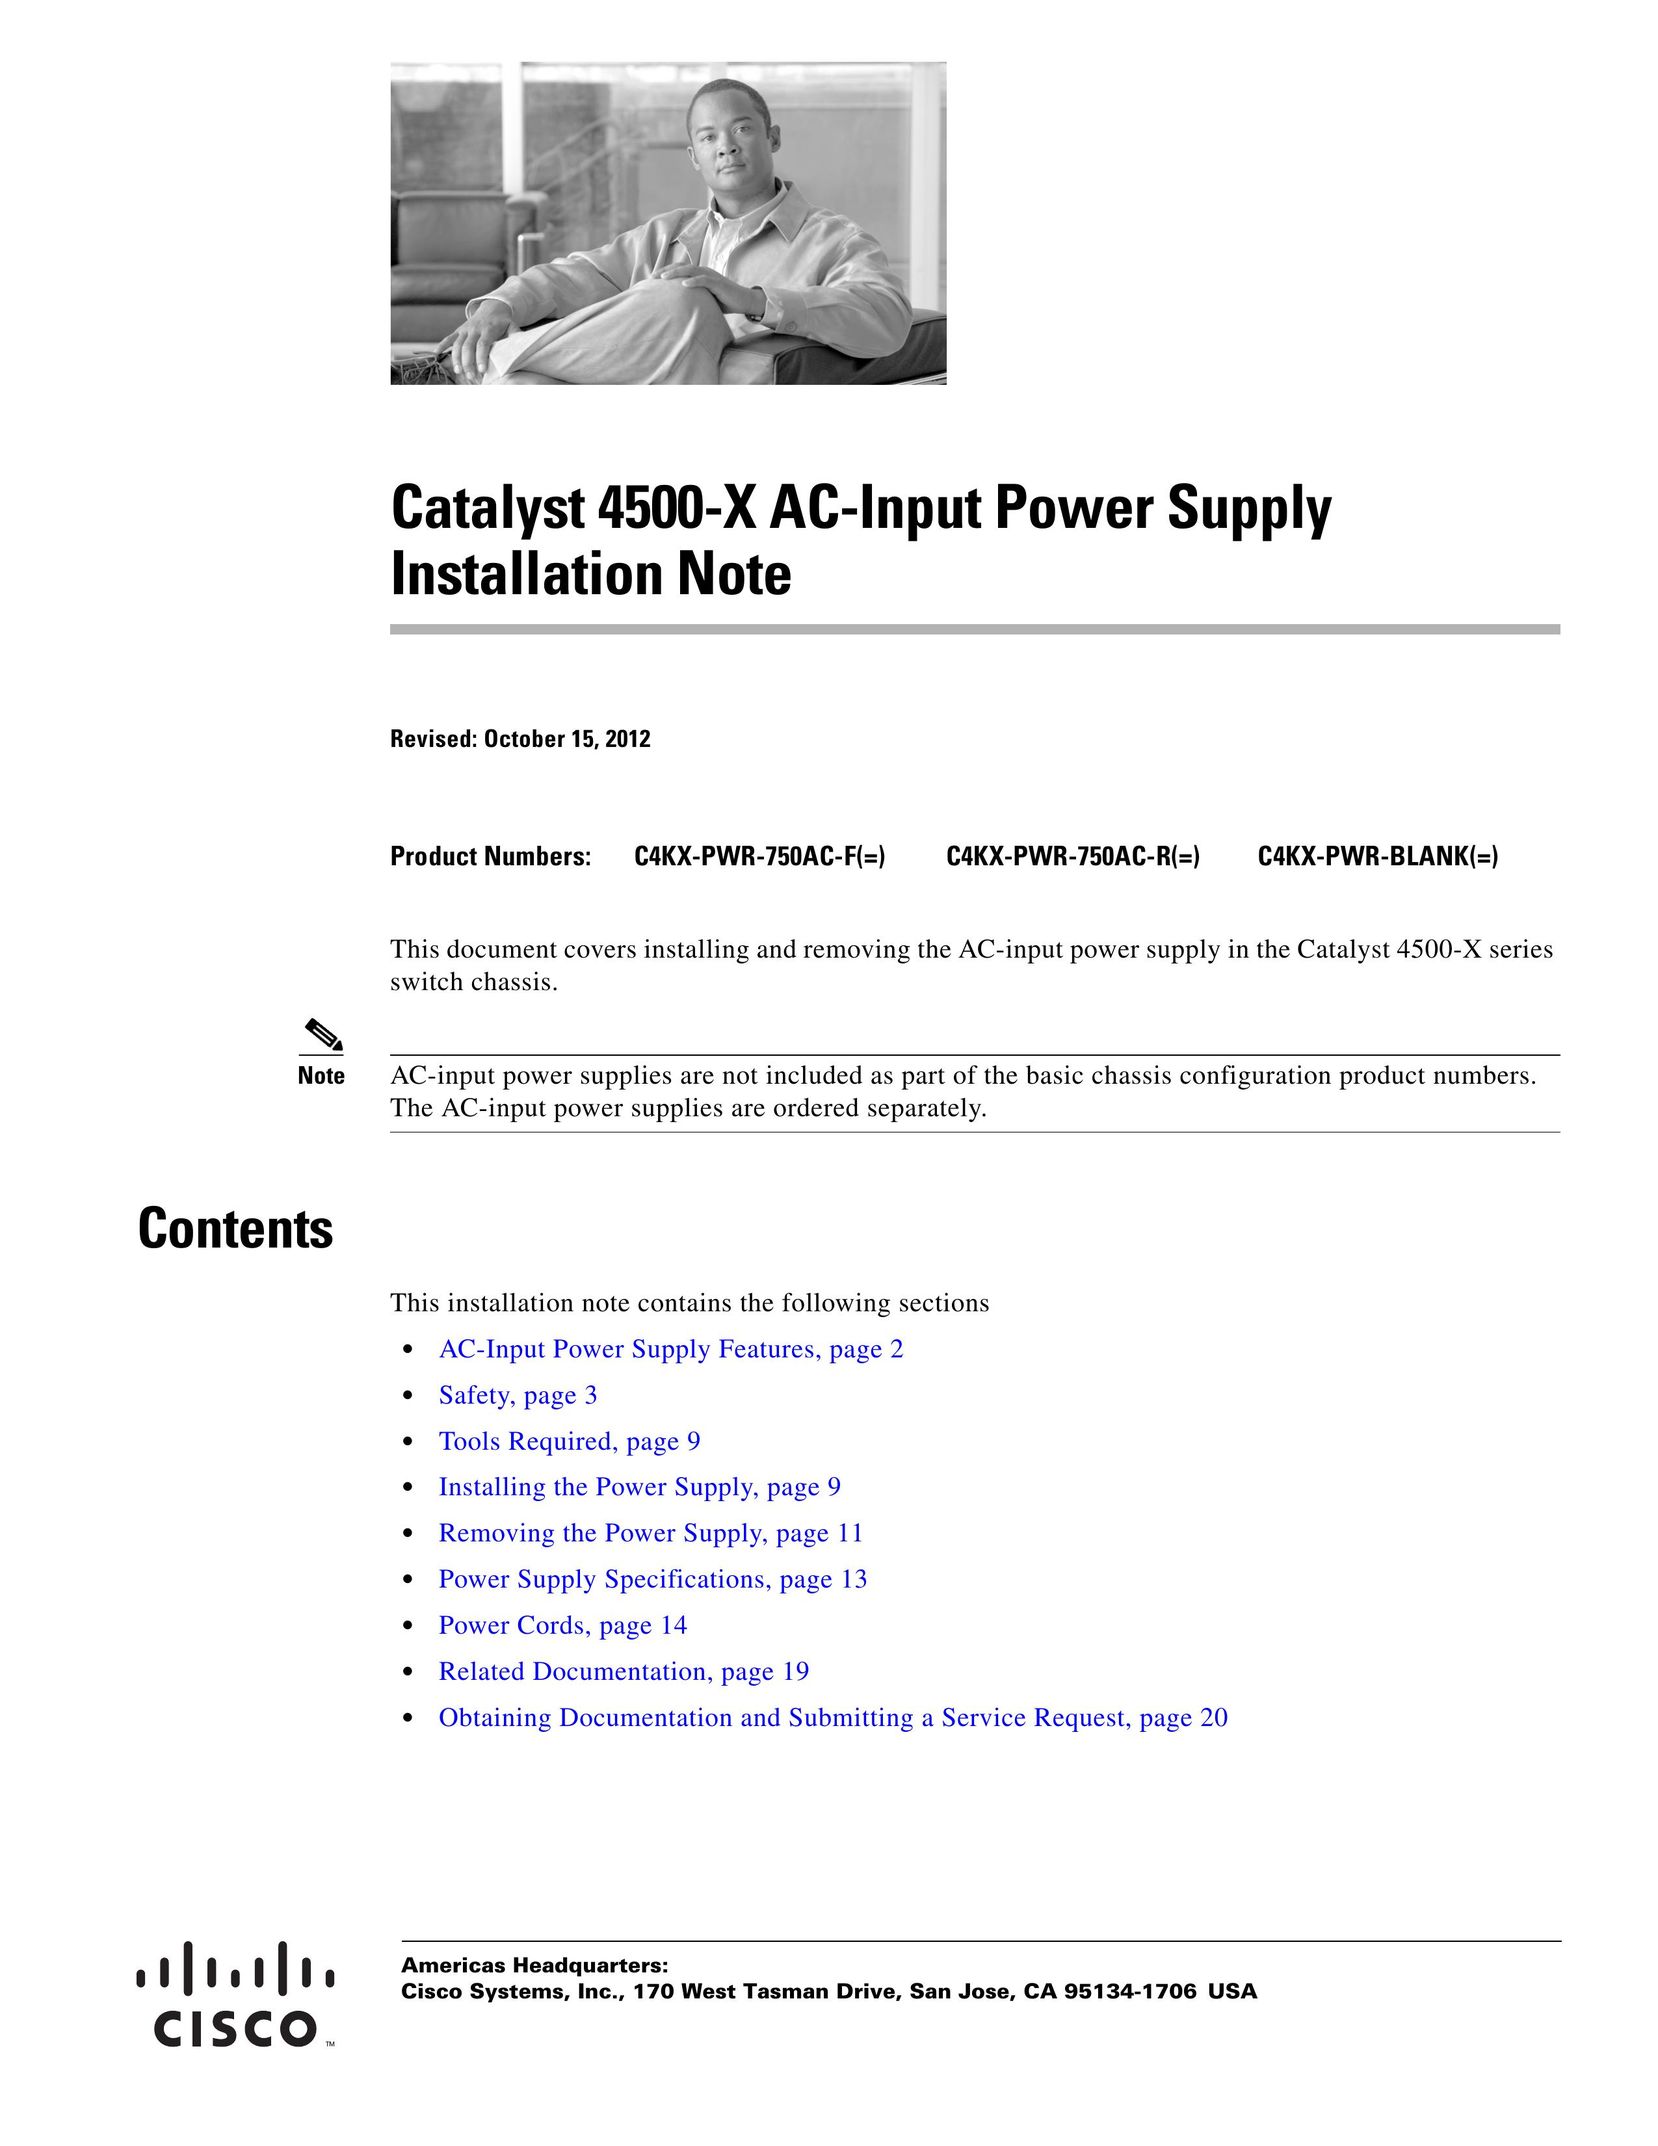 Cisco Systems C4KX-PWR-BLANK Power Supply User Manual